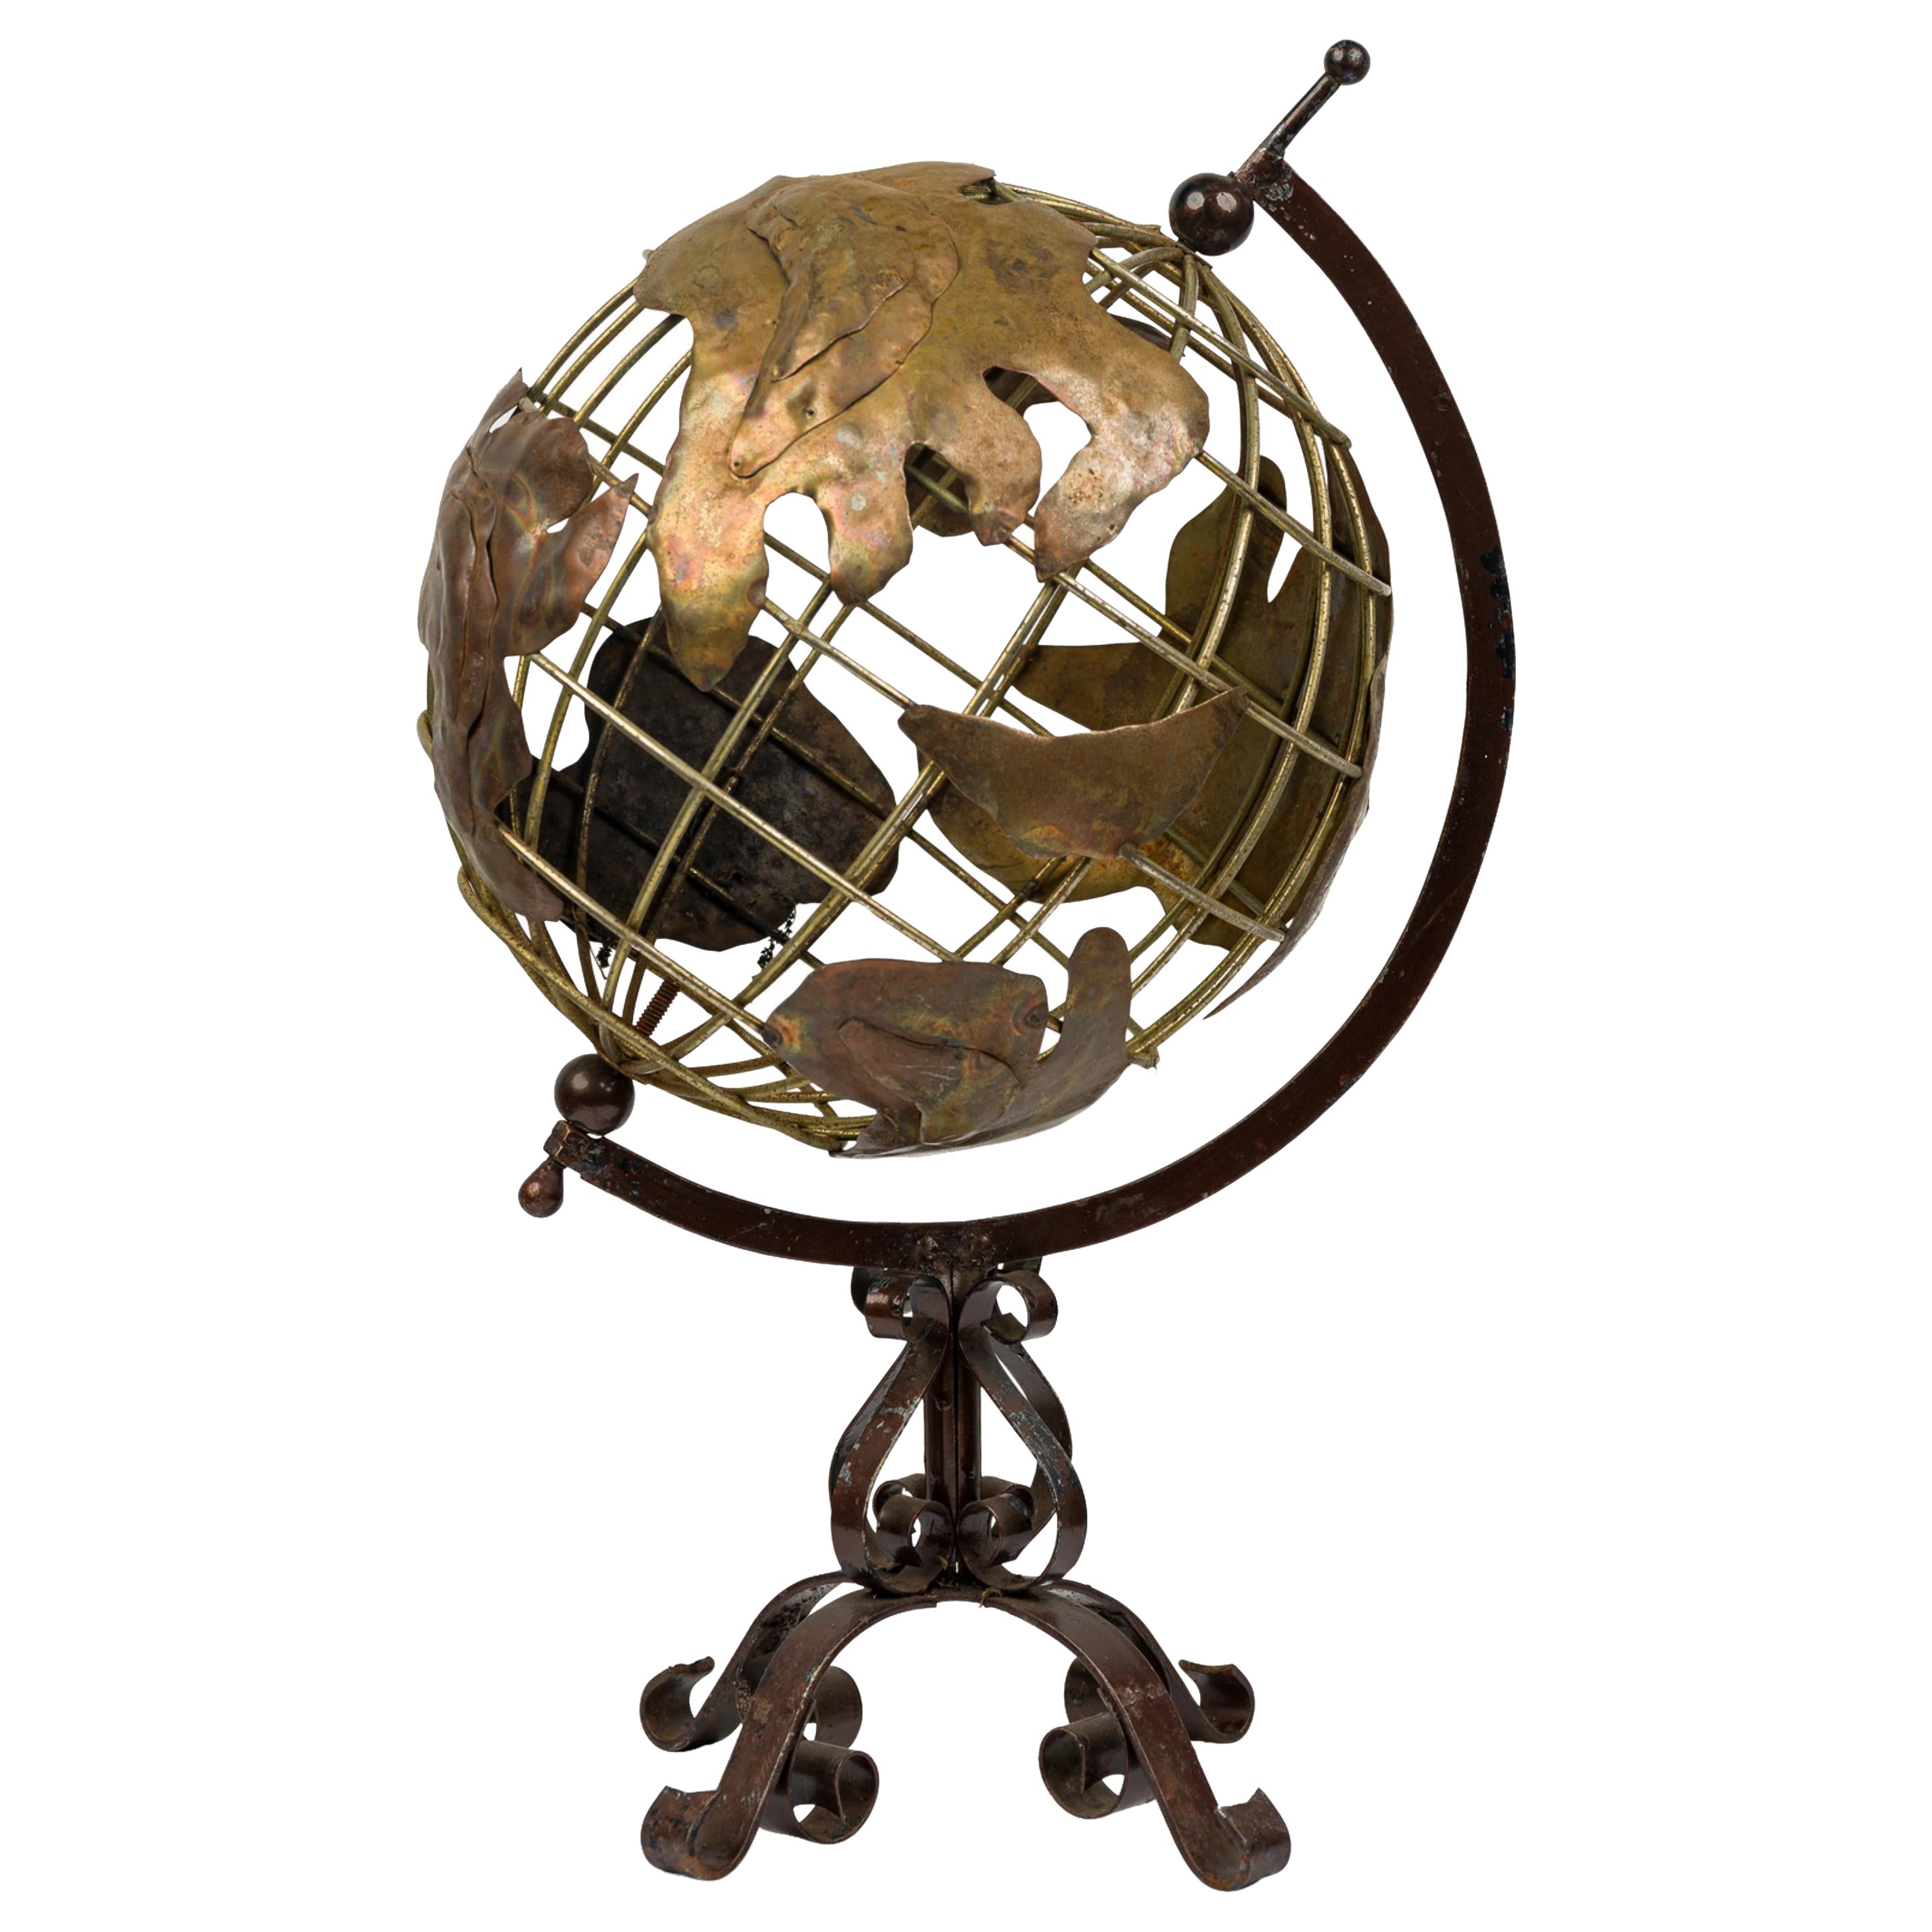 Contemporary American Rotating Metal Globe auf Stand